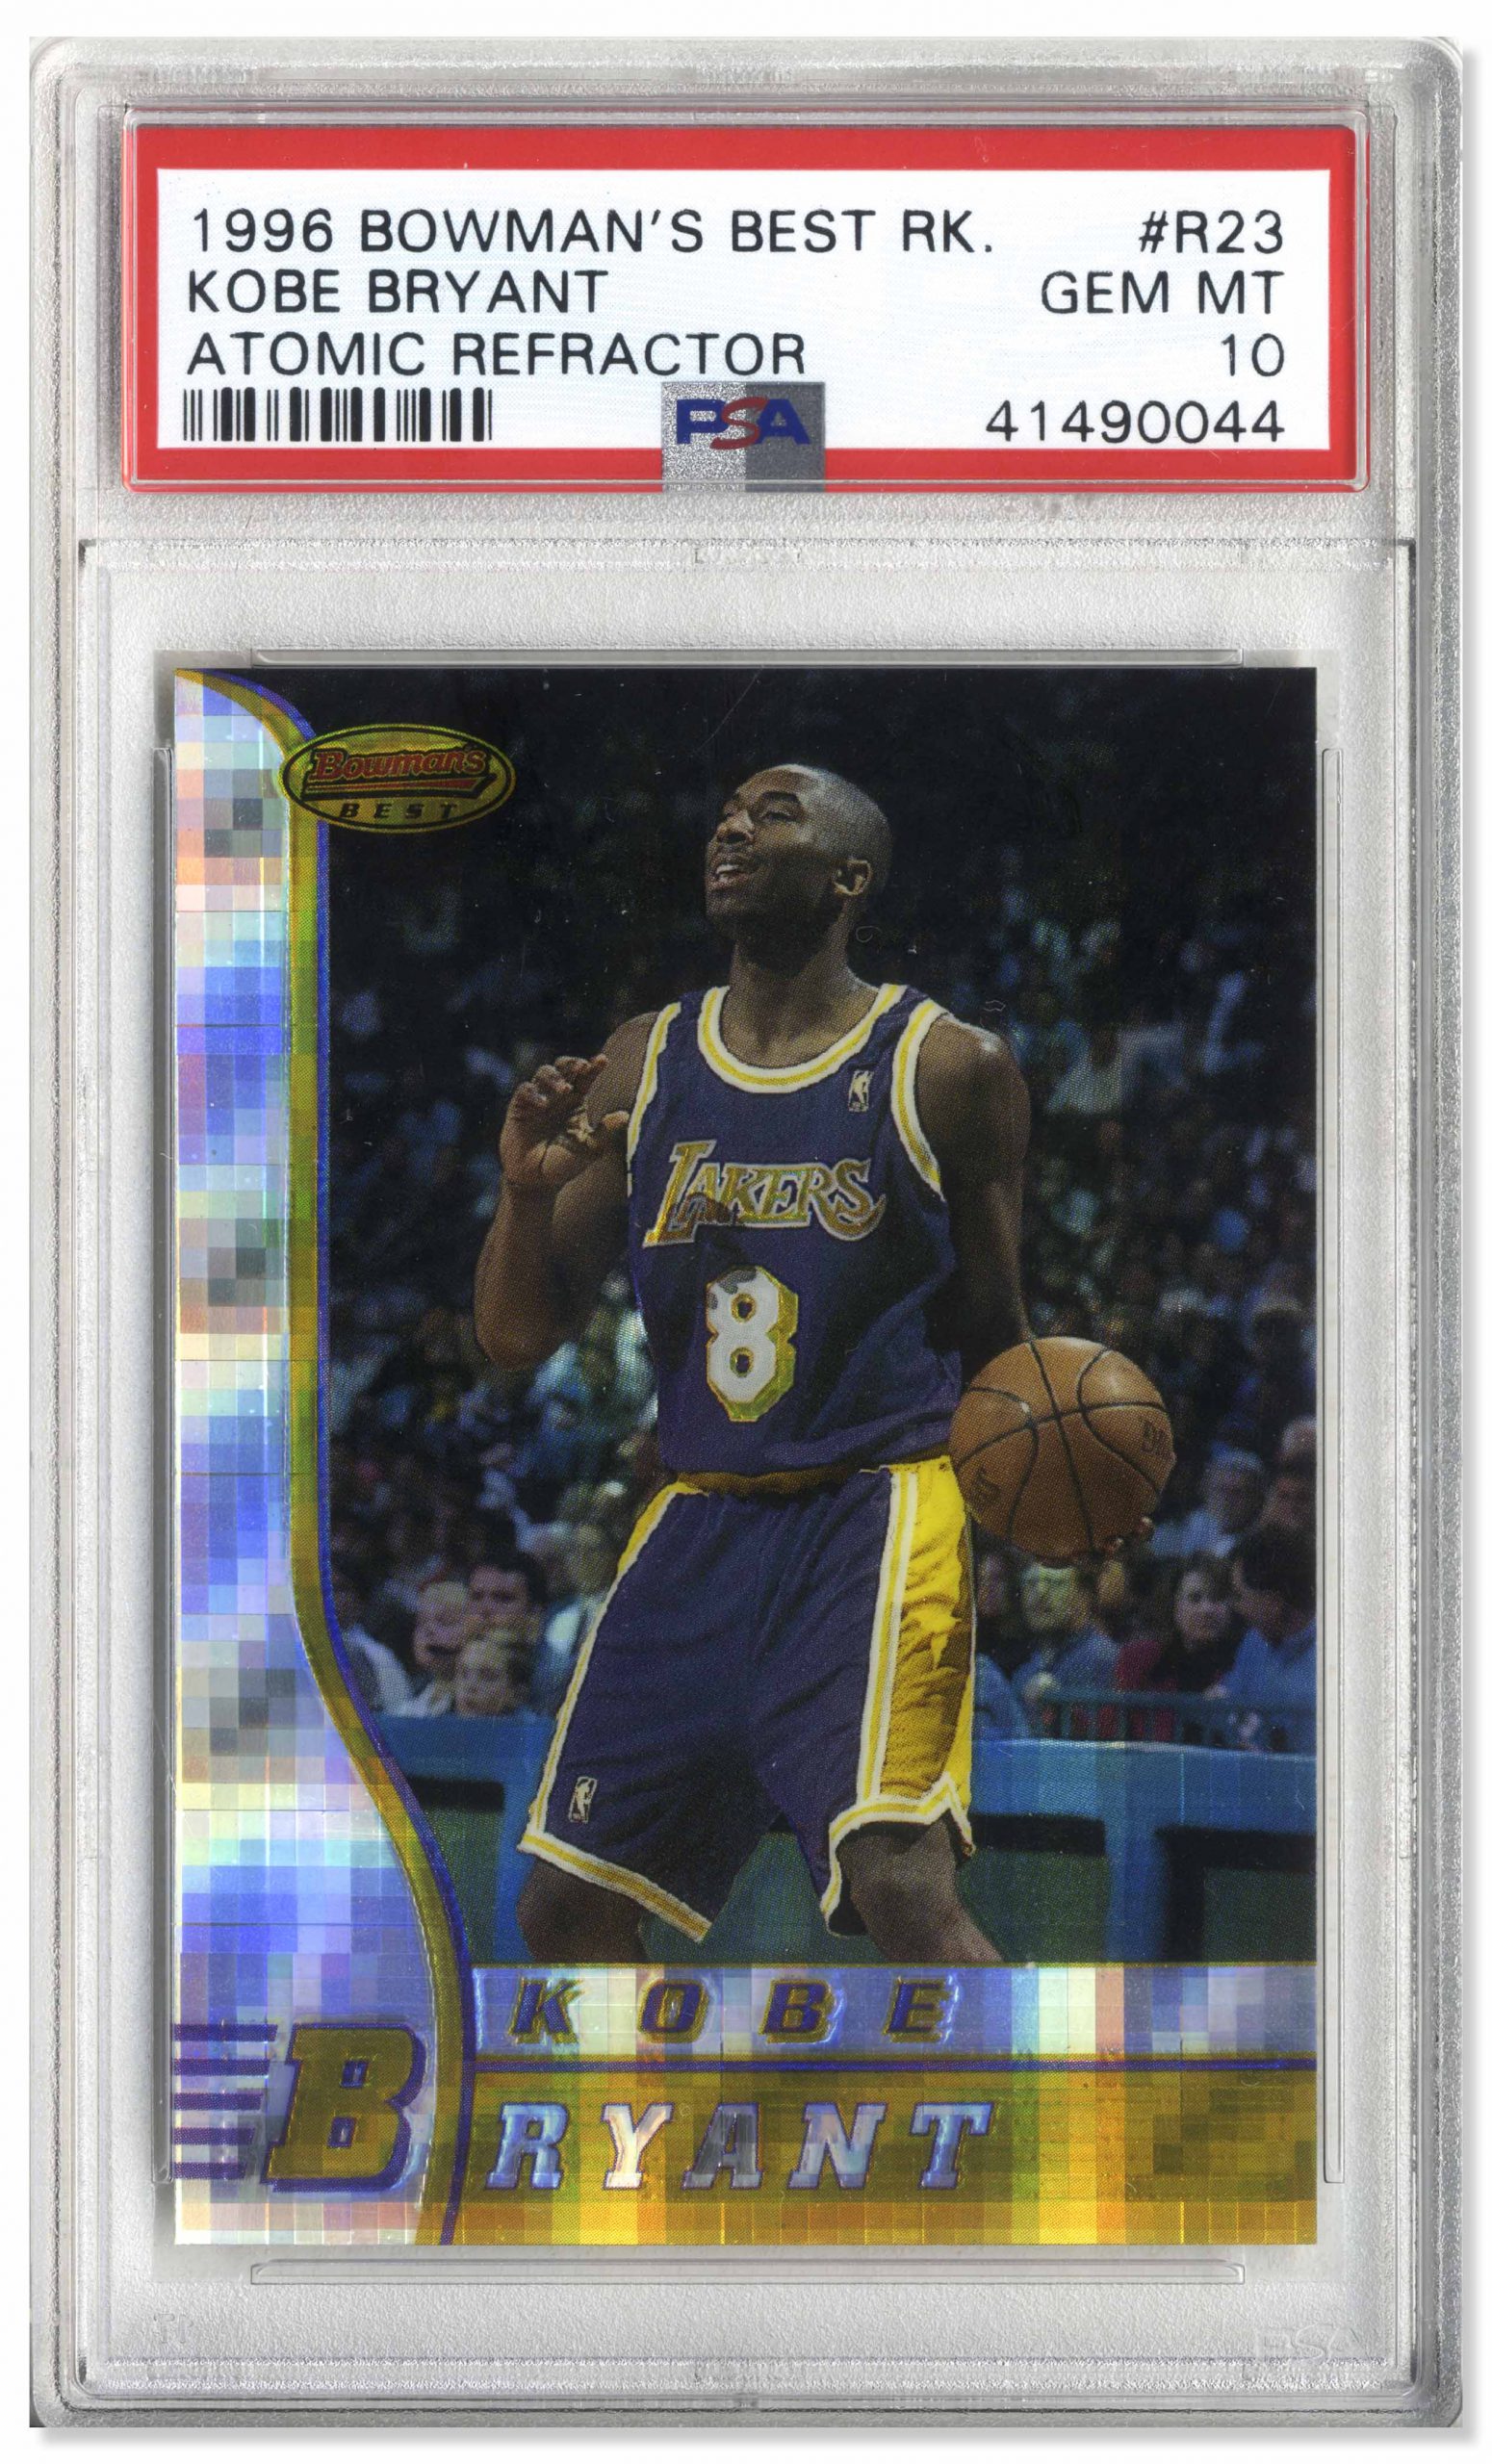 2007-08 Topps #2 Kevin Durant Rookie Graded PSA 10